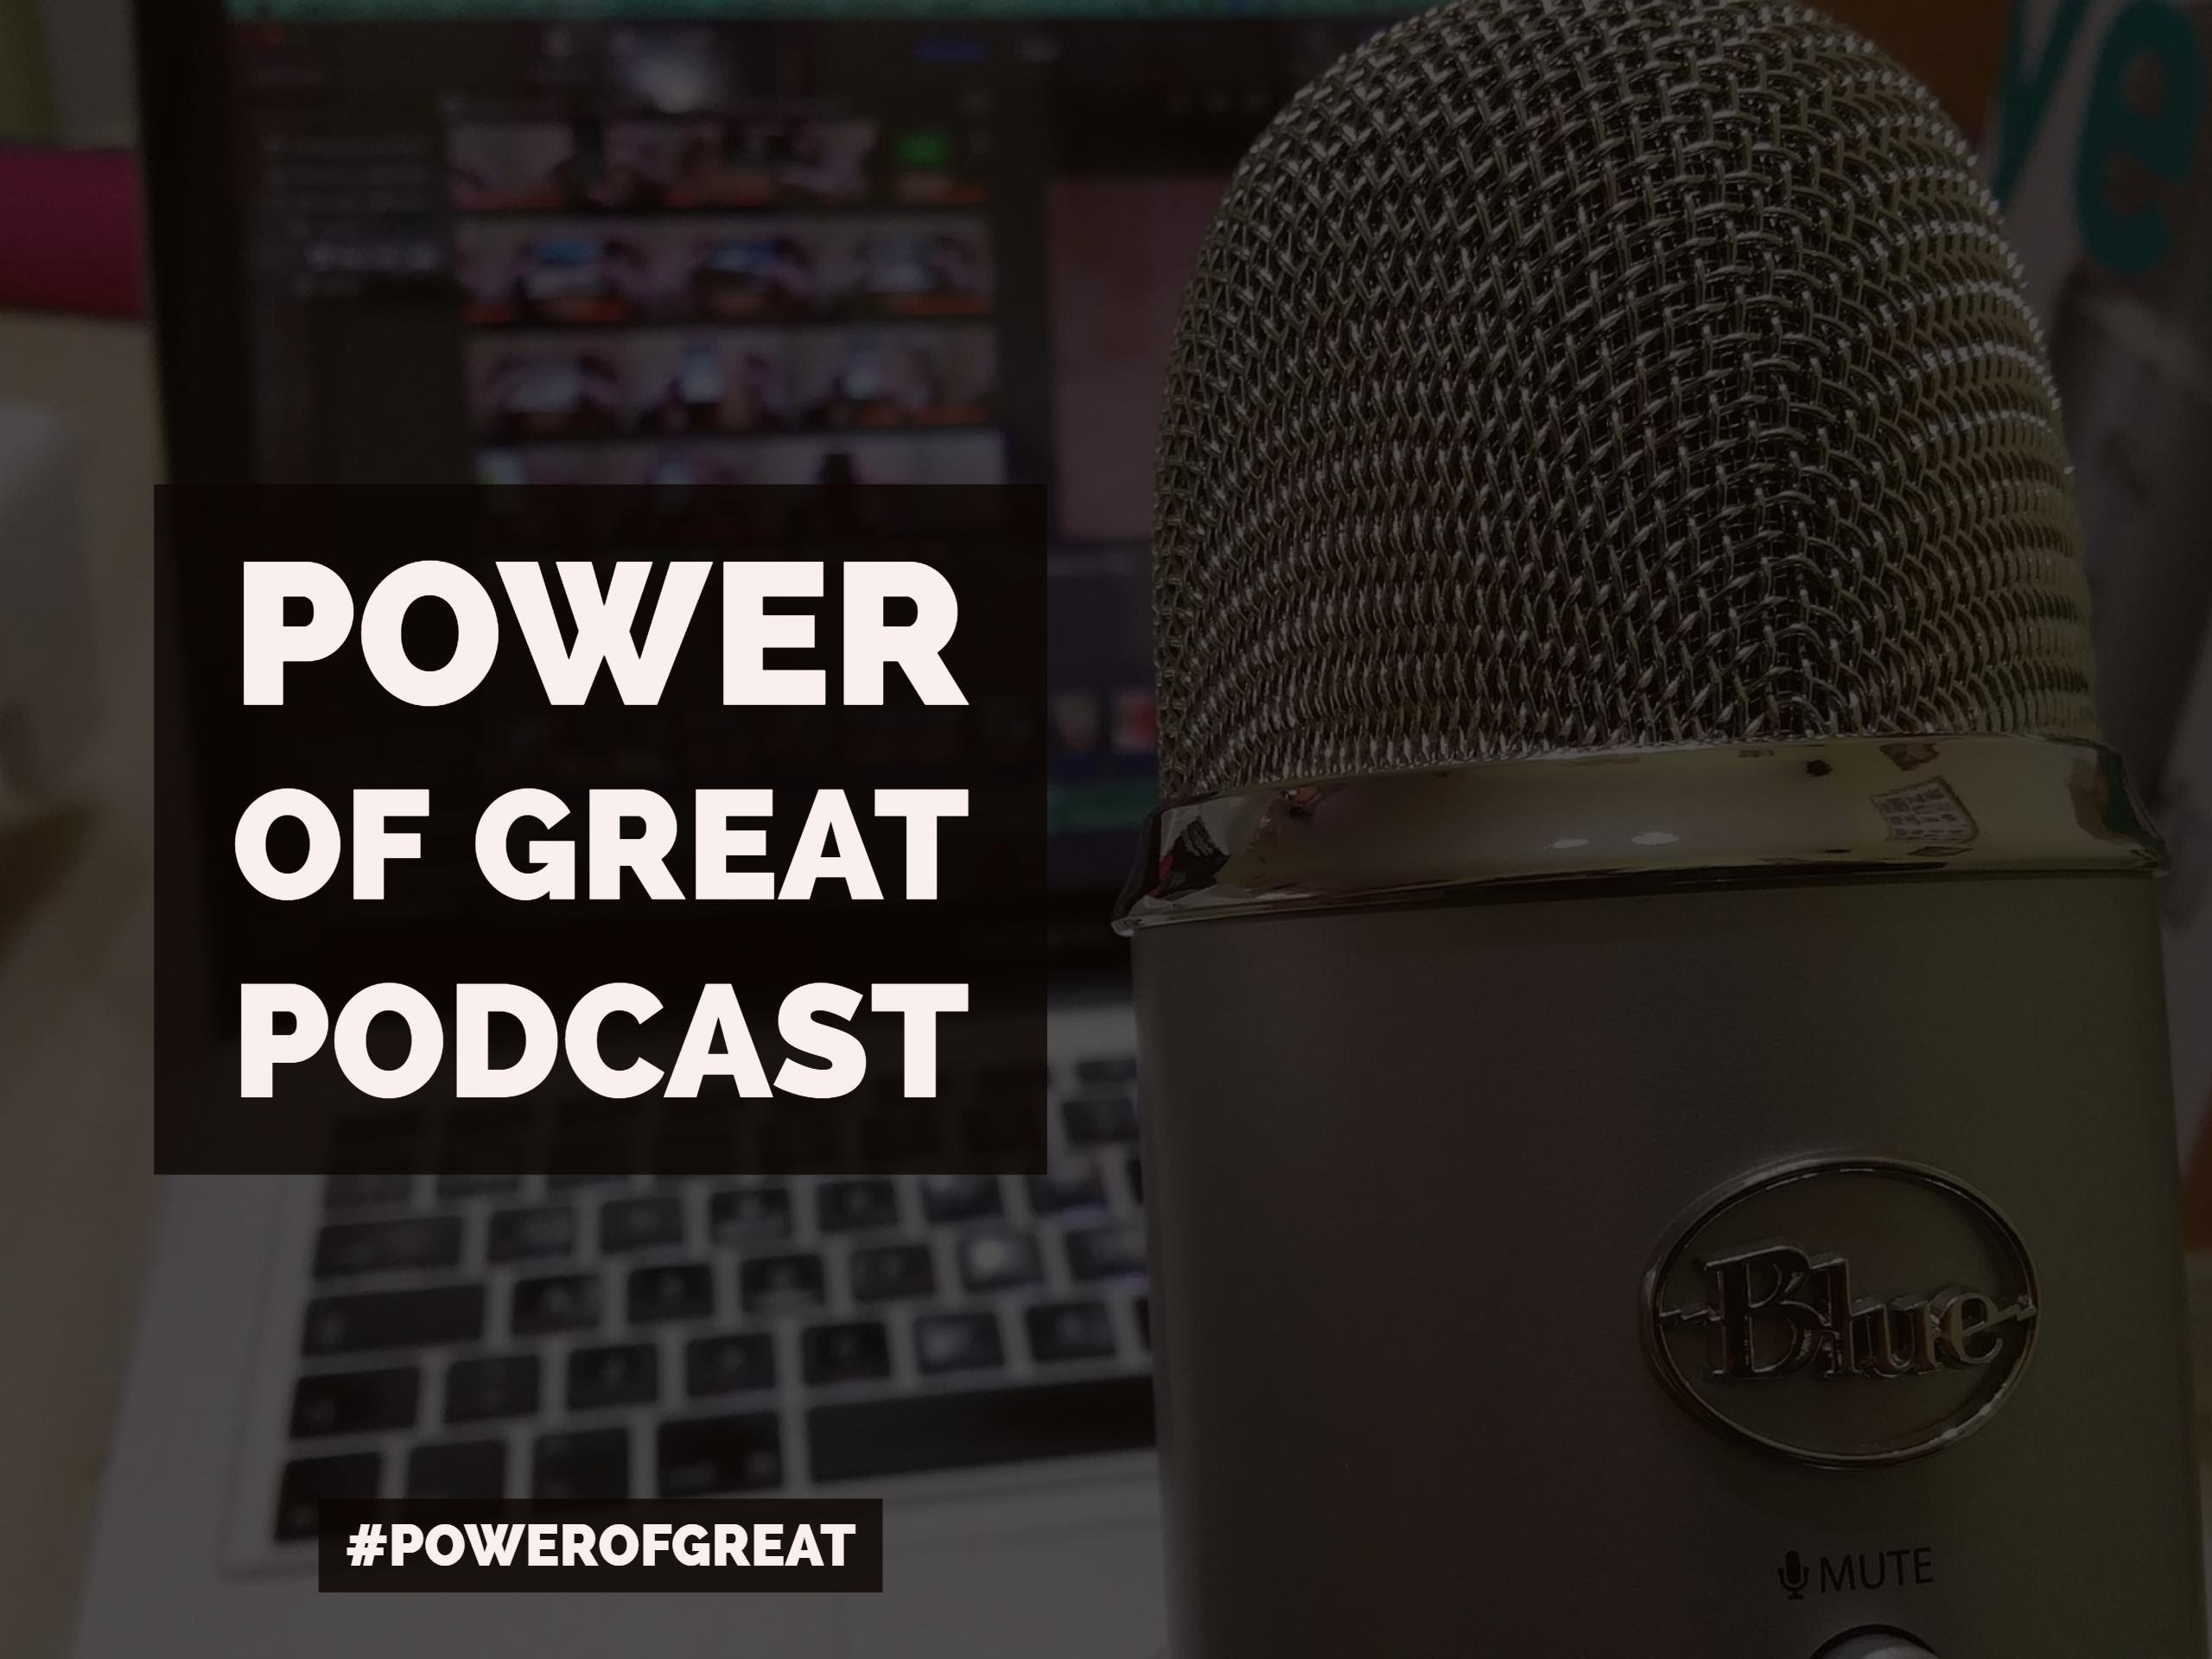 The Power of Great!